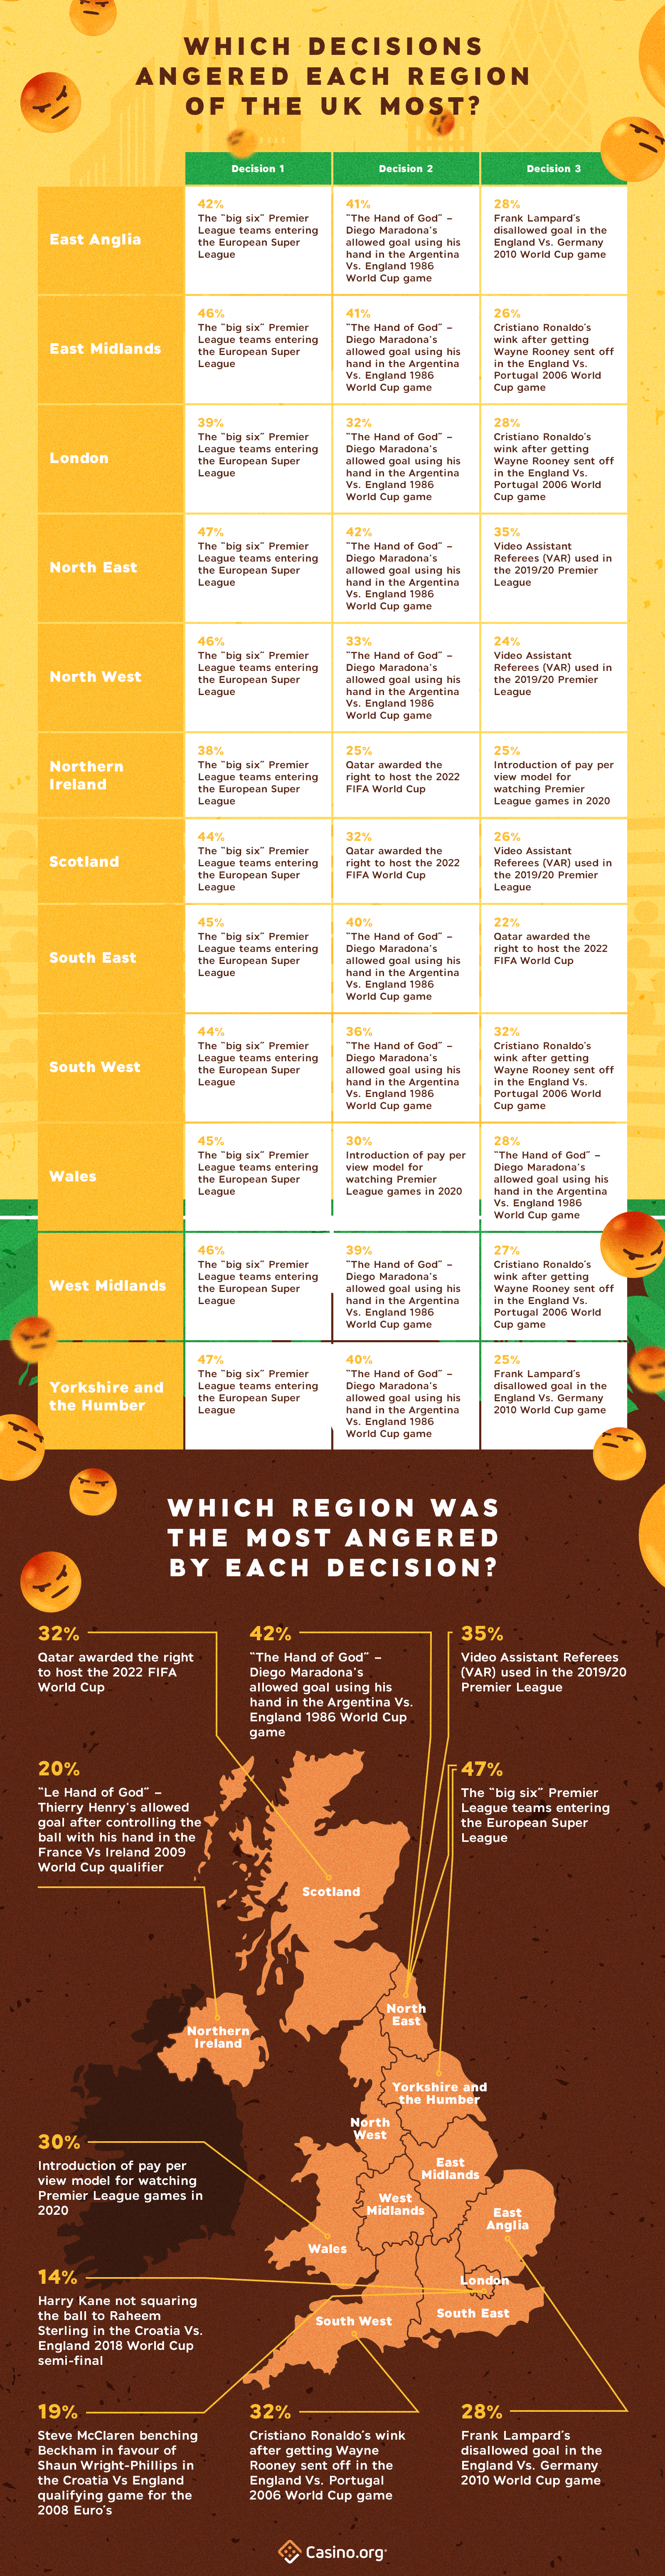 Decisions that make football players the angriest by UK region - infographic